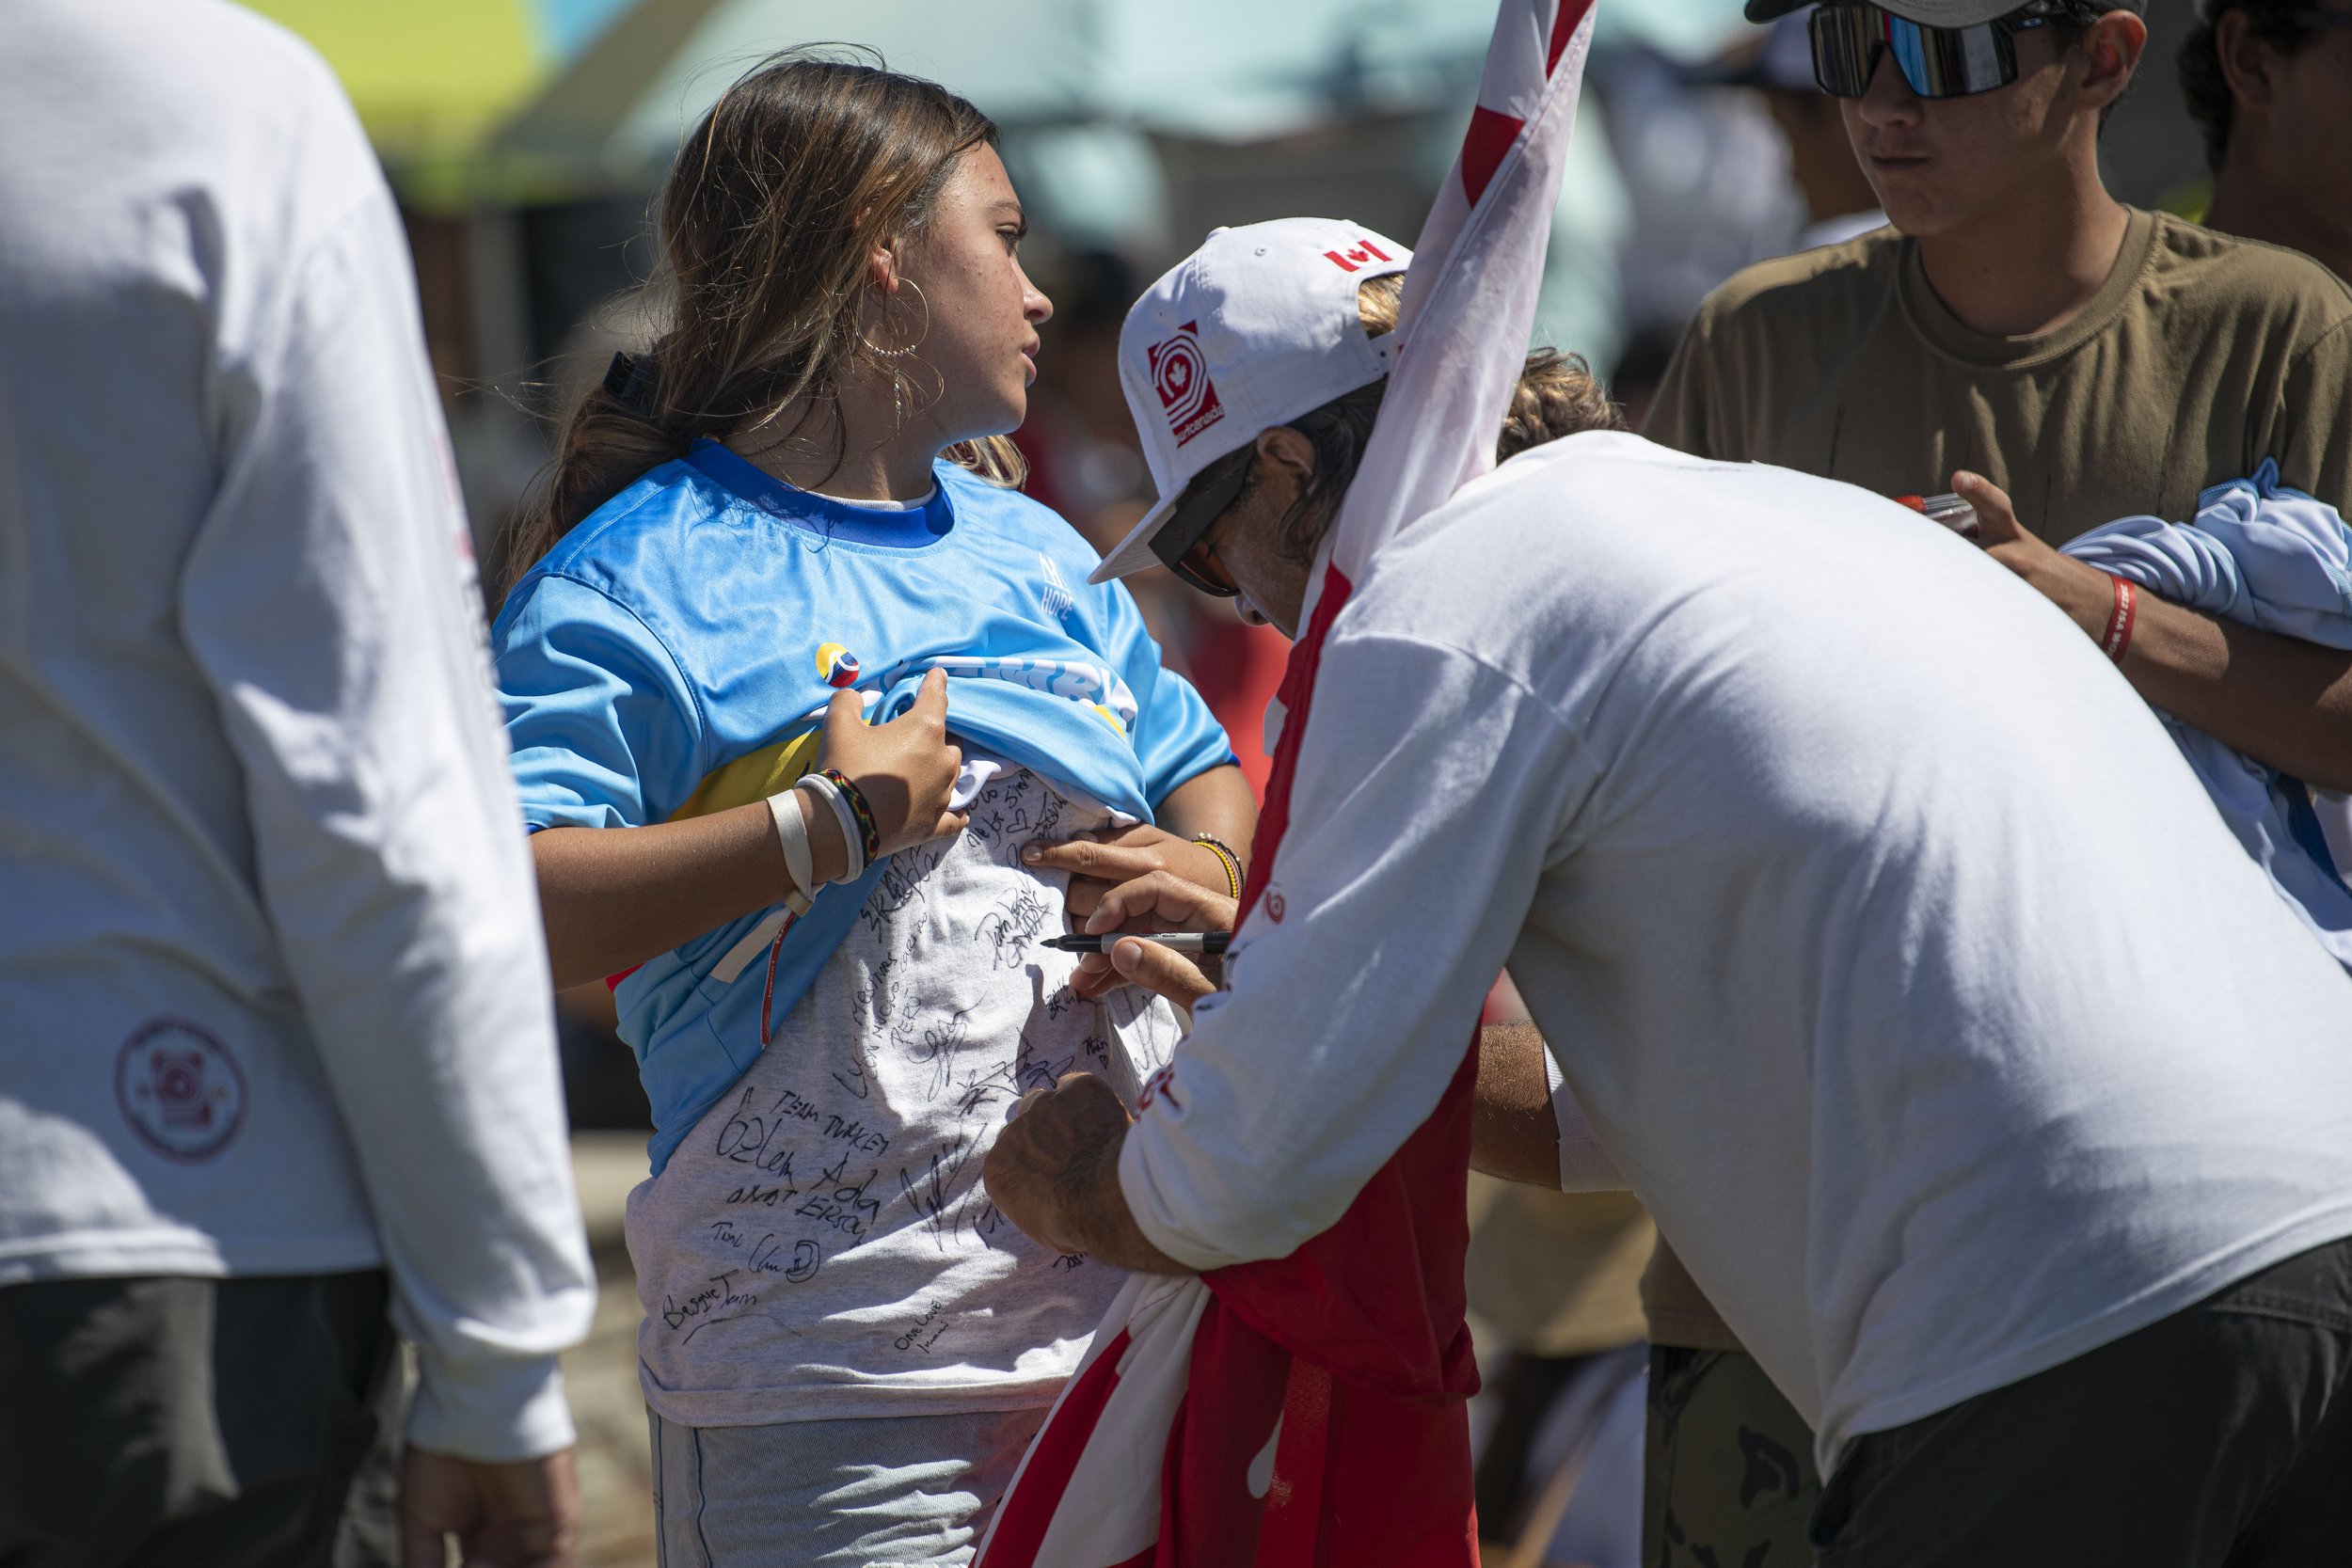  A fan gets her shirt signed by a member from team Canada at the award ceremony for the ISA World Surfing Games. (Jon Putman | The Corsair) 